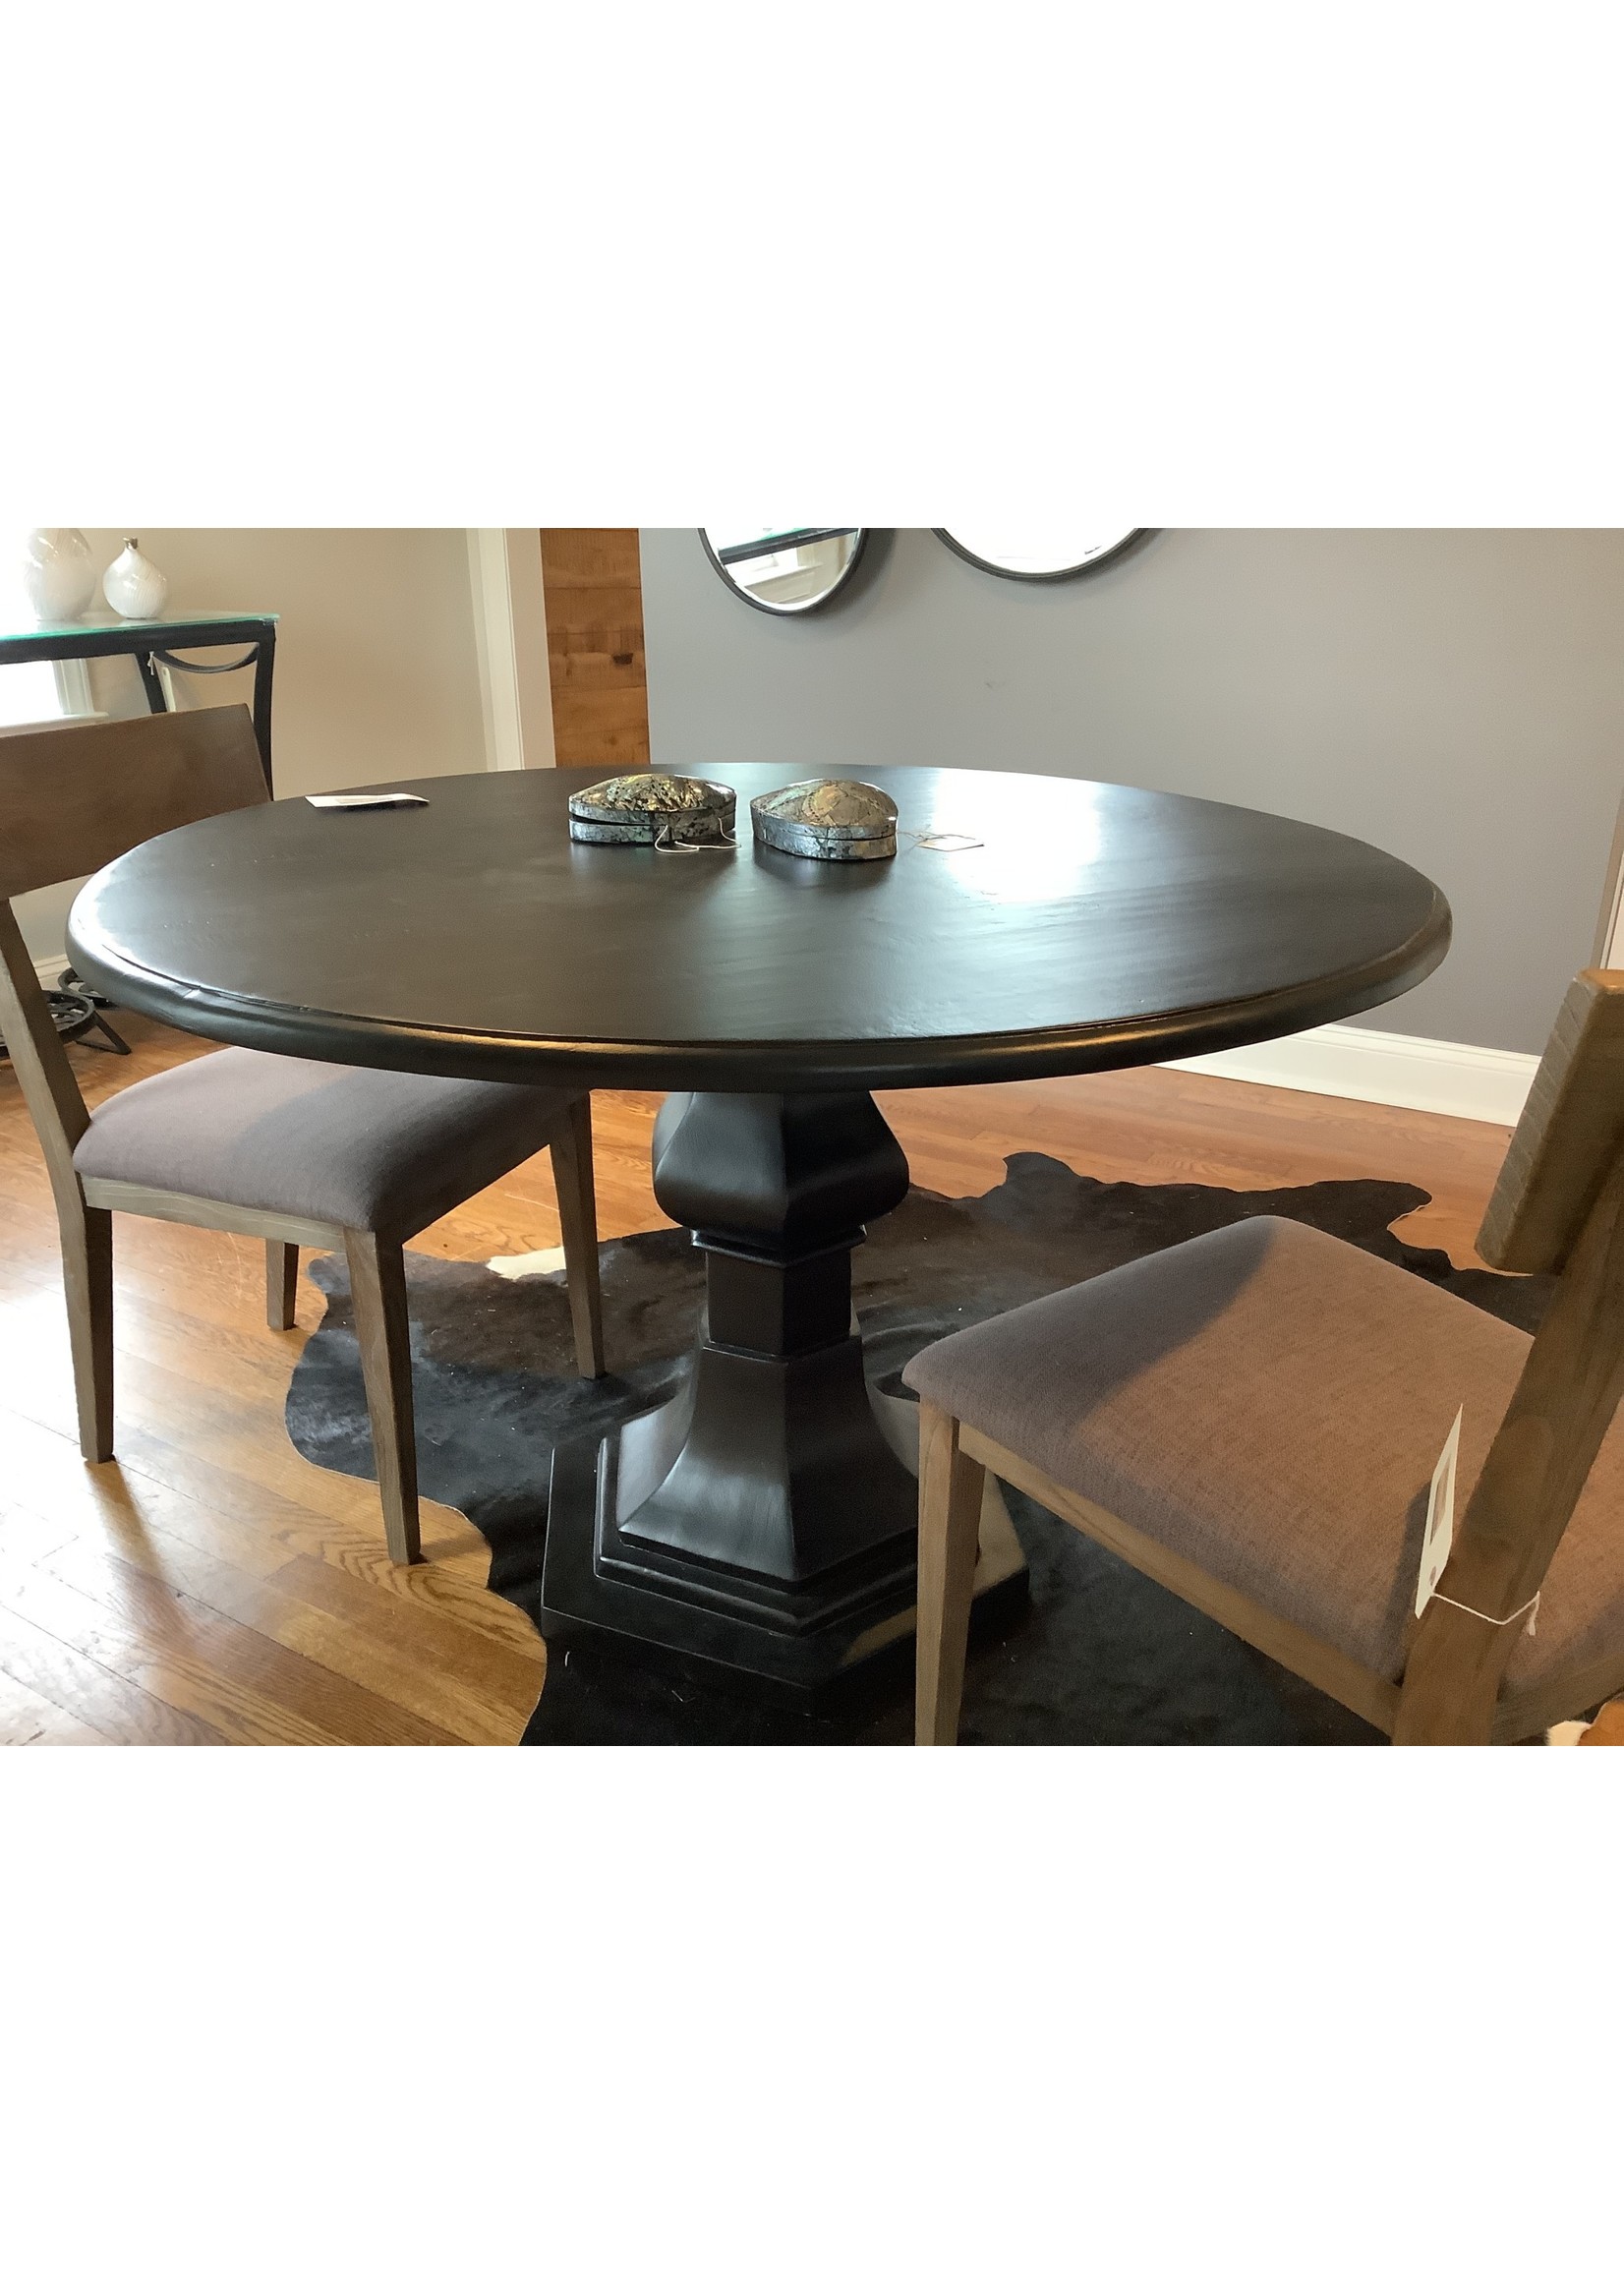 Iron Butterfly  Imports Black Round Dining Table Pedestal 48"x48"x30"